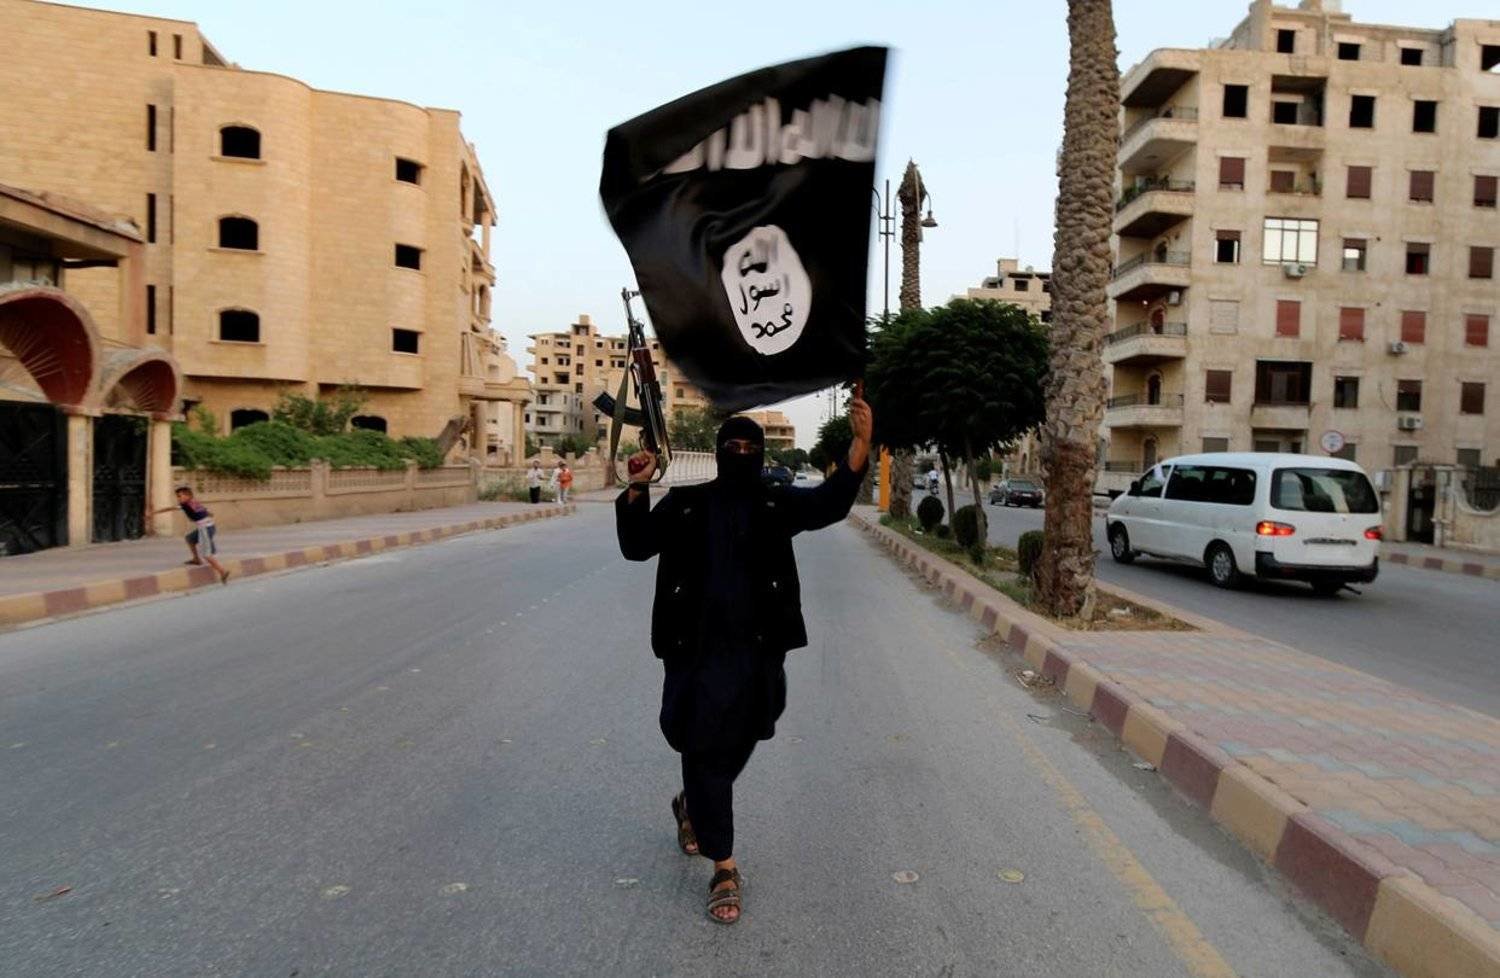 A member loyal to ISIS waves a flag in Raqqa, Syria June 29, 2014. REUTERS/Stringer/File Photo
